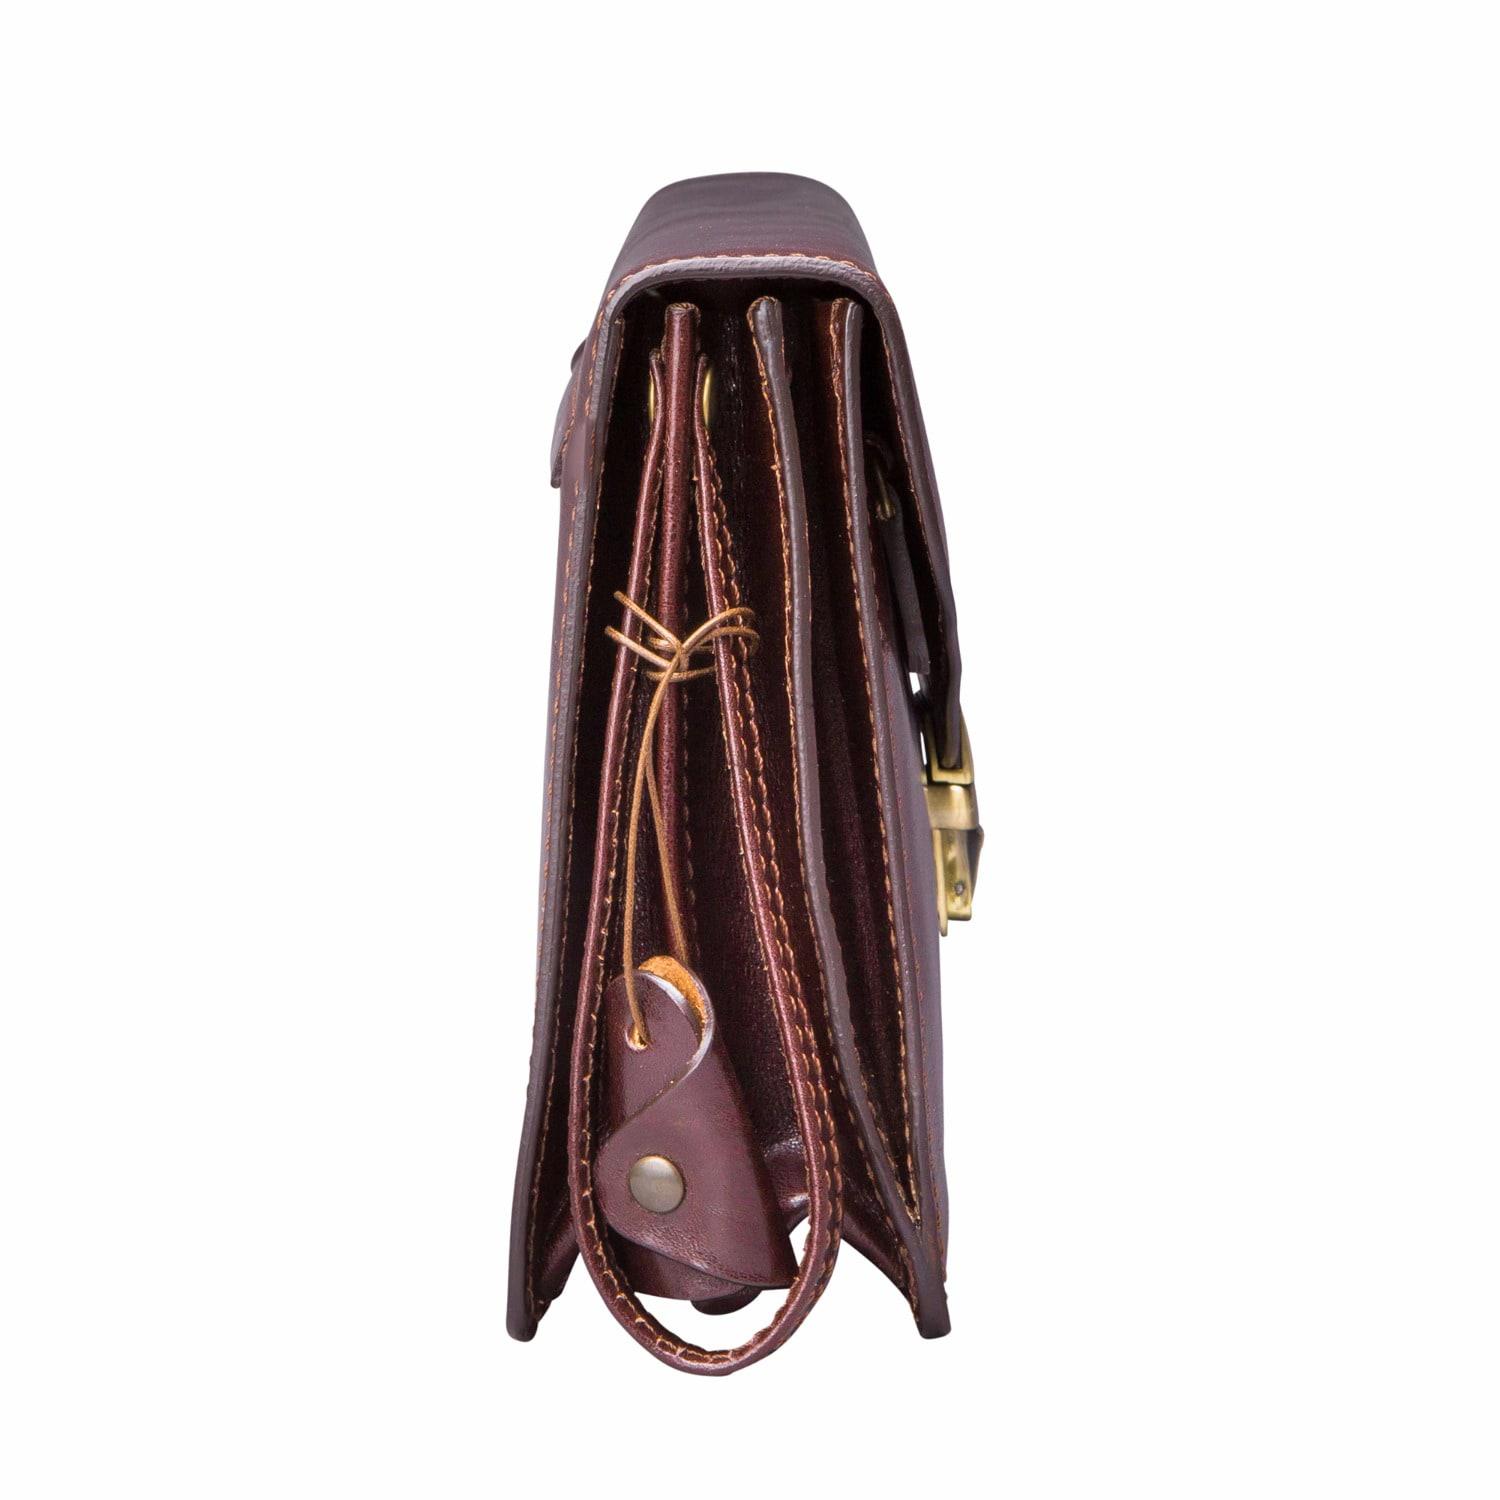 Maxwell Scott Bags The Santino Mens Leather Clutch Bag With Wrist Strap Chocolate Brown for Men ...